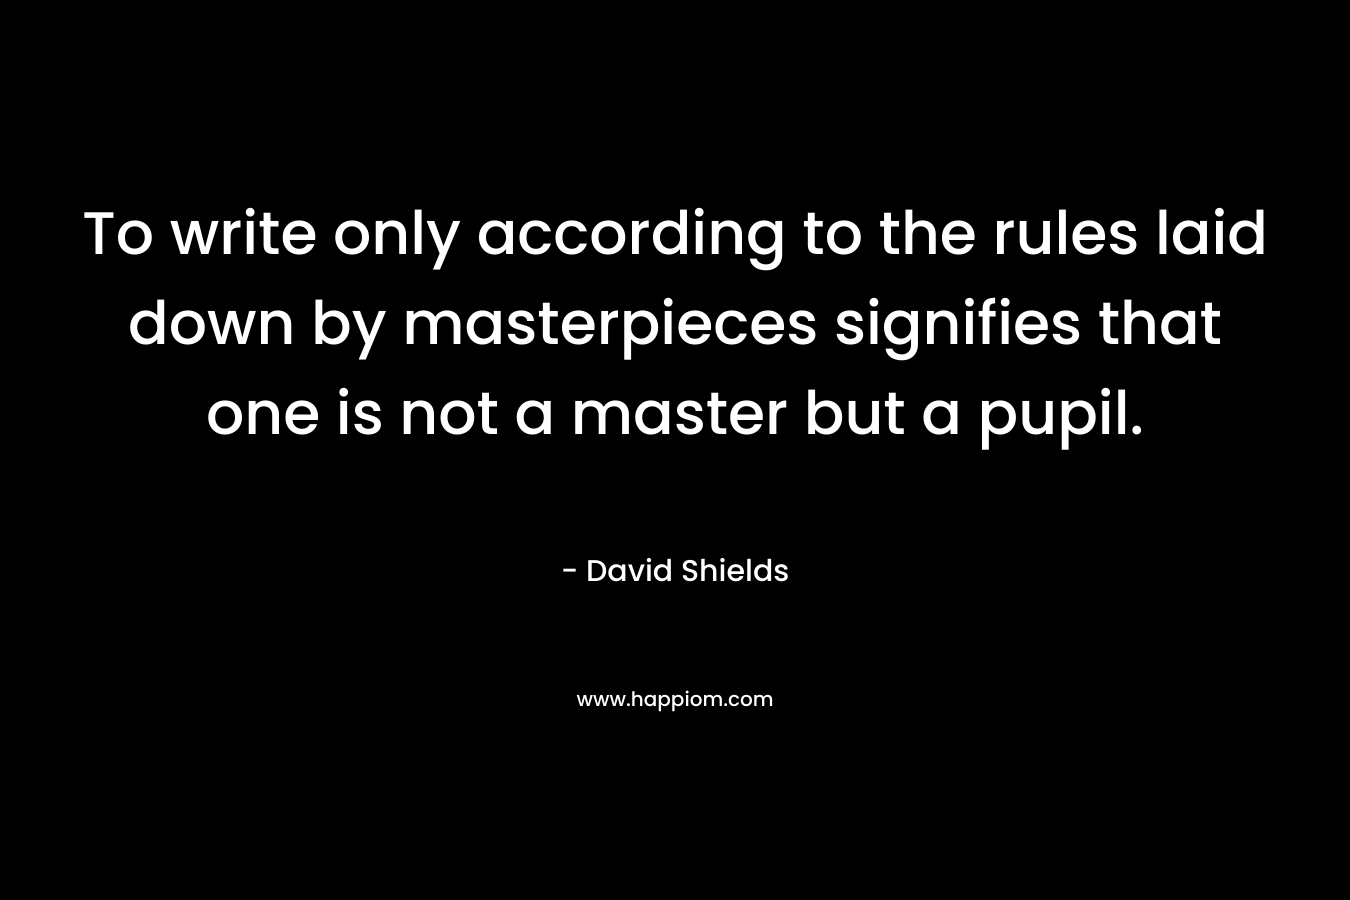 To write only according to the rules laid down by masterpieces signifies that one is not a master but a pupil.